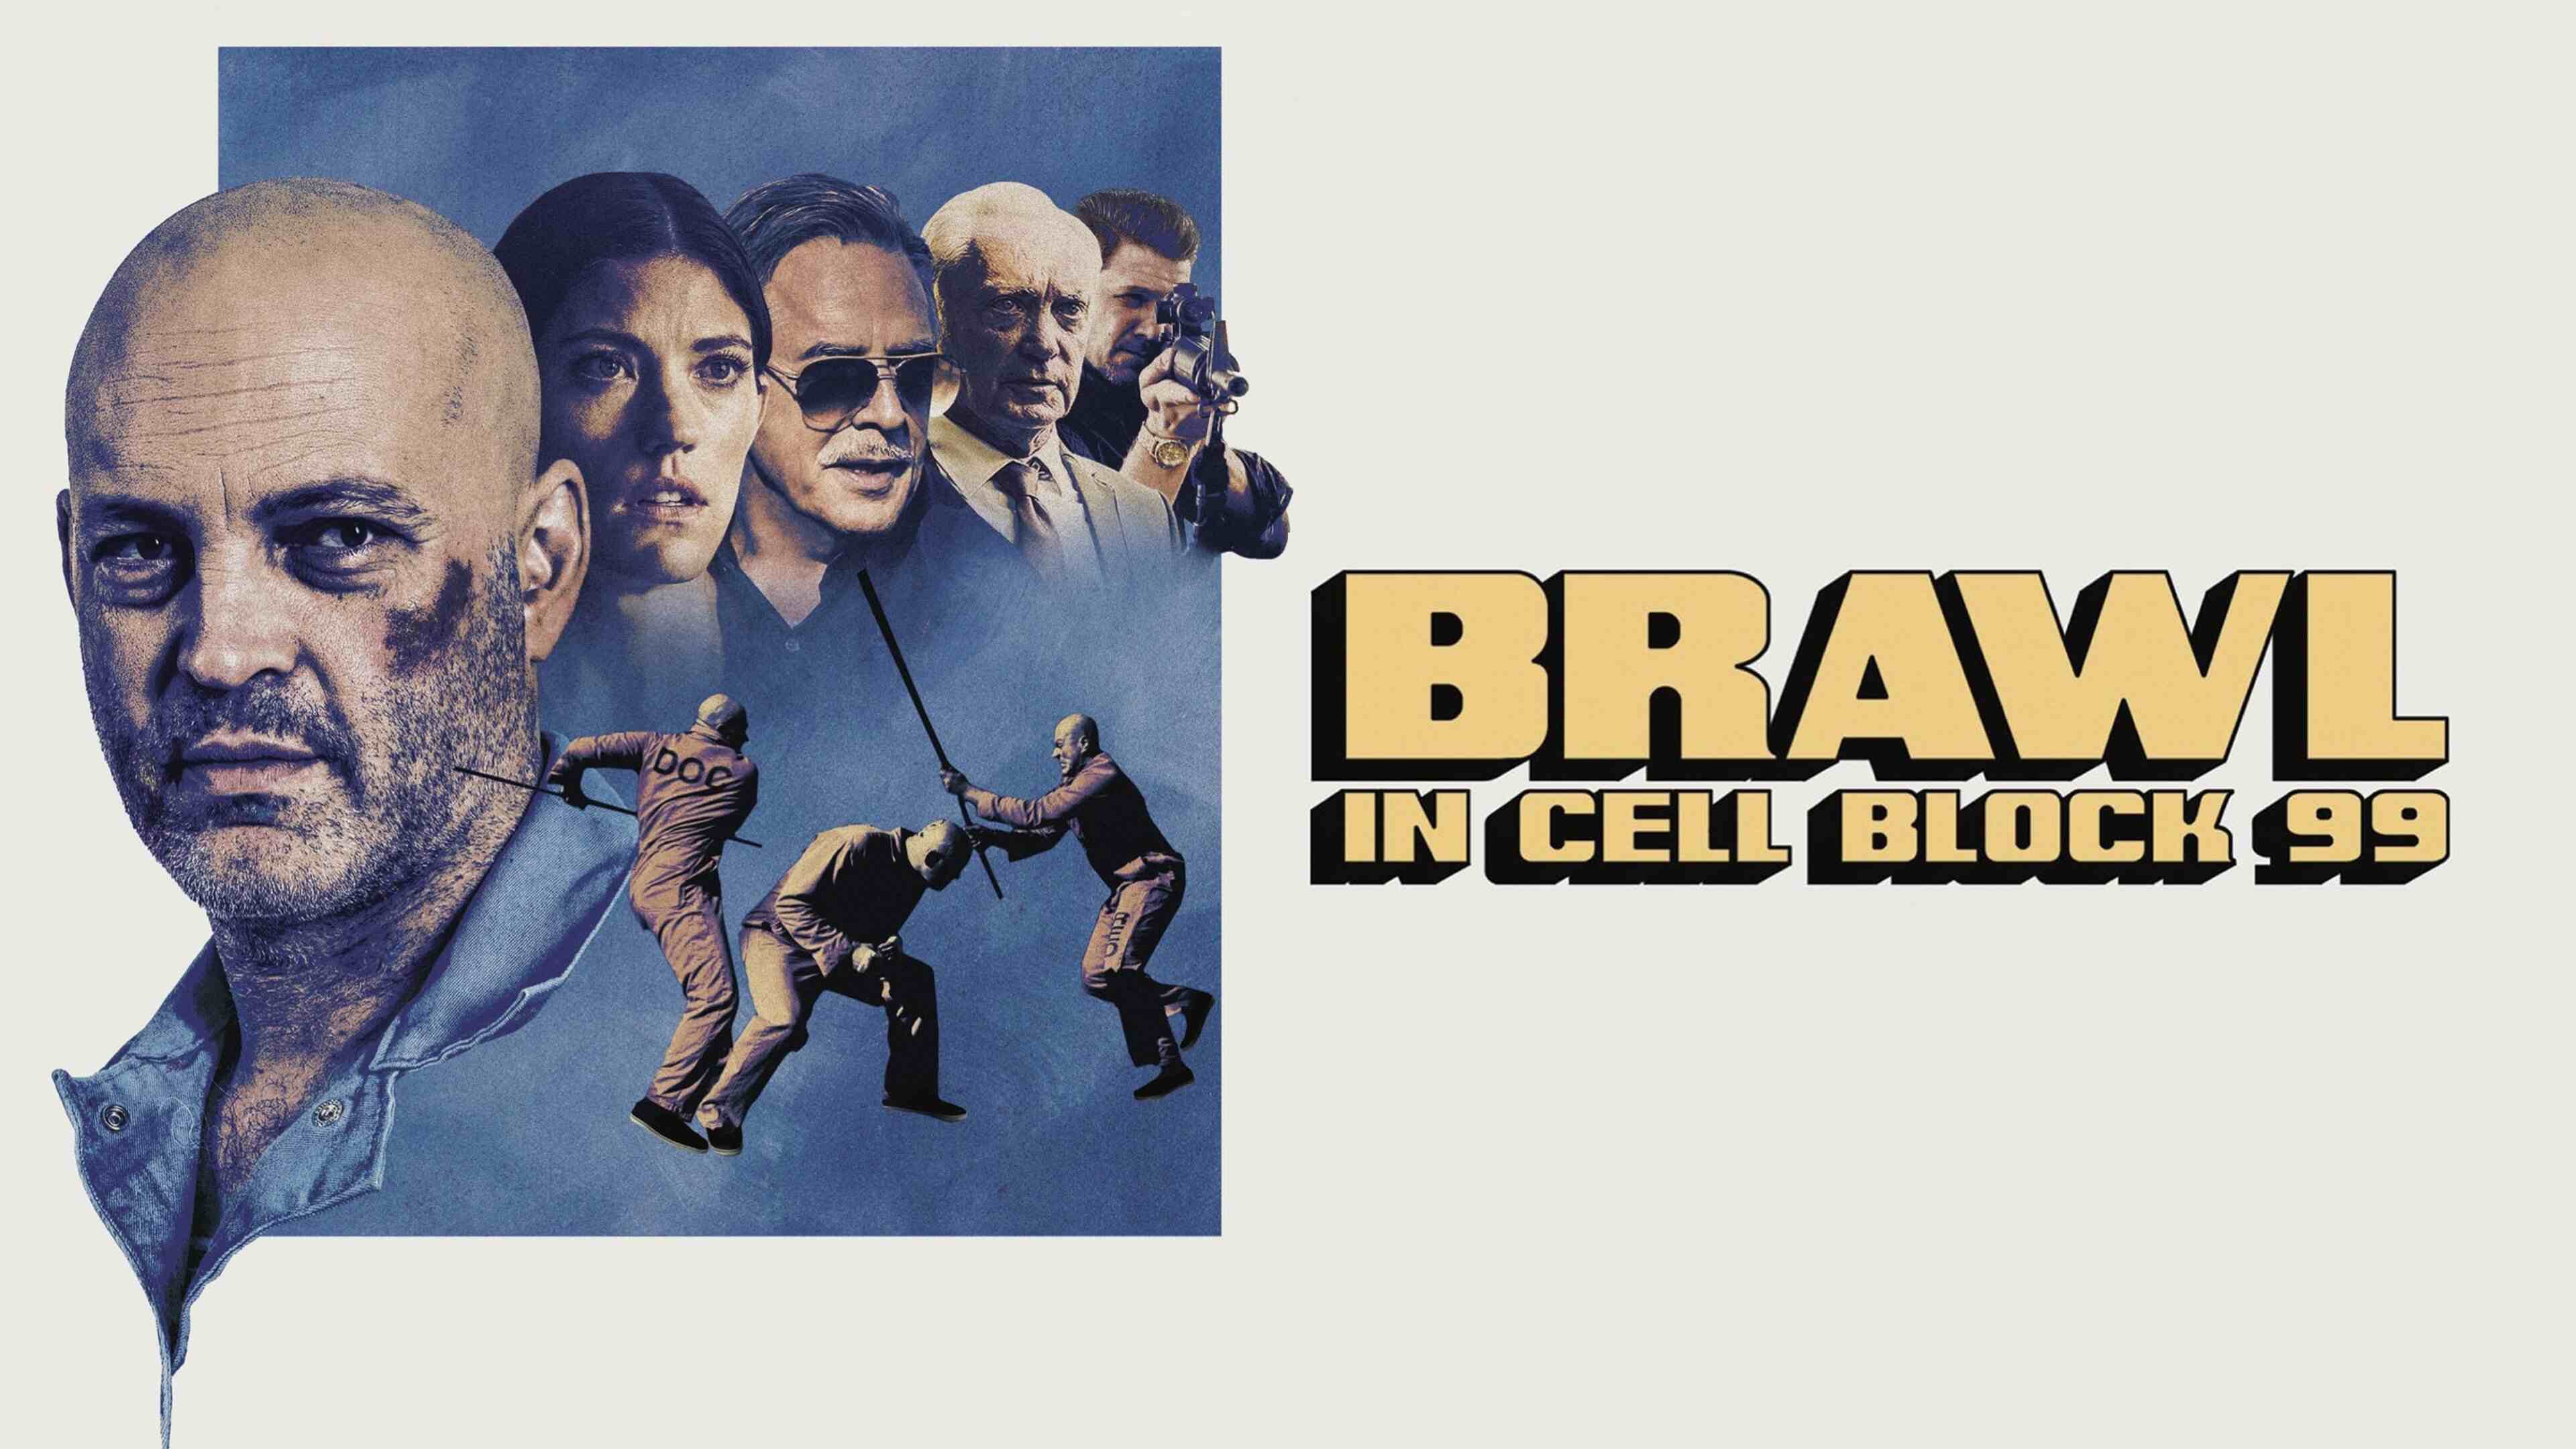 33-facts-about-the-movie-brawl-in-cell-block-99